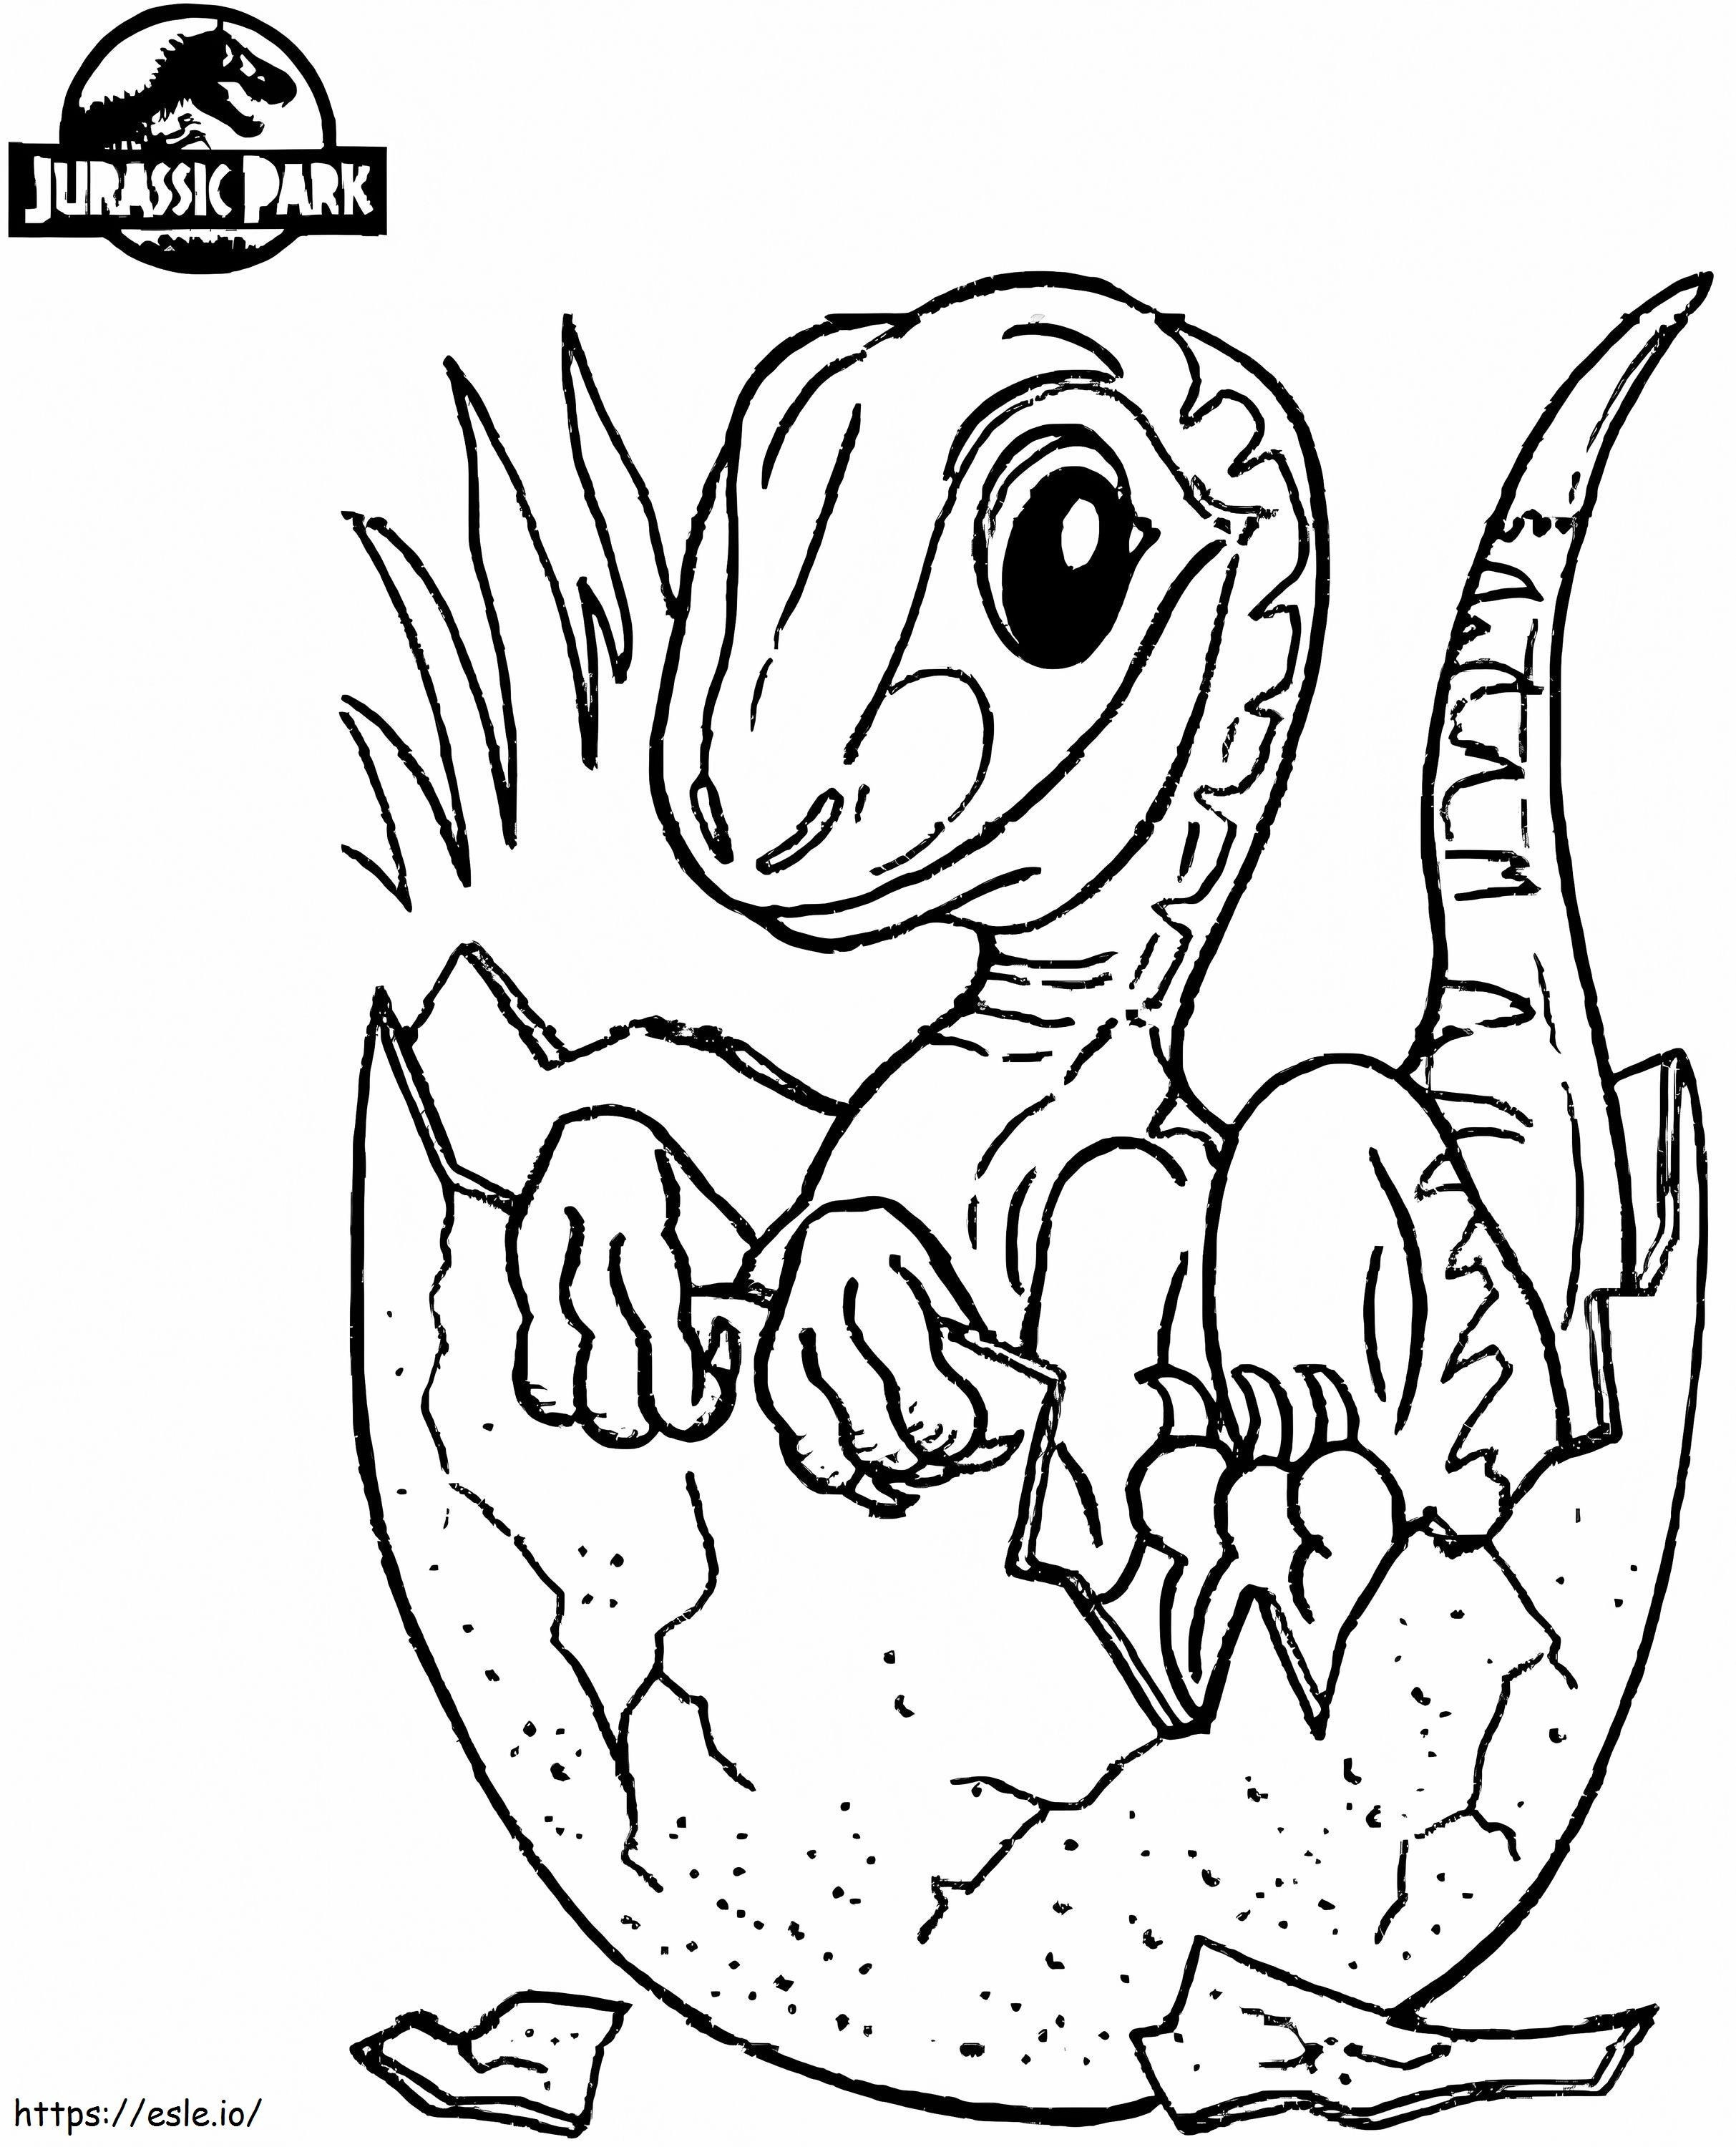 Baby Dinosaur In Jurassic World coloring page